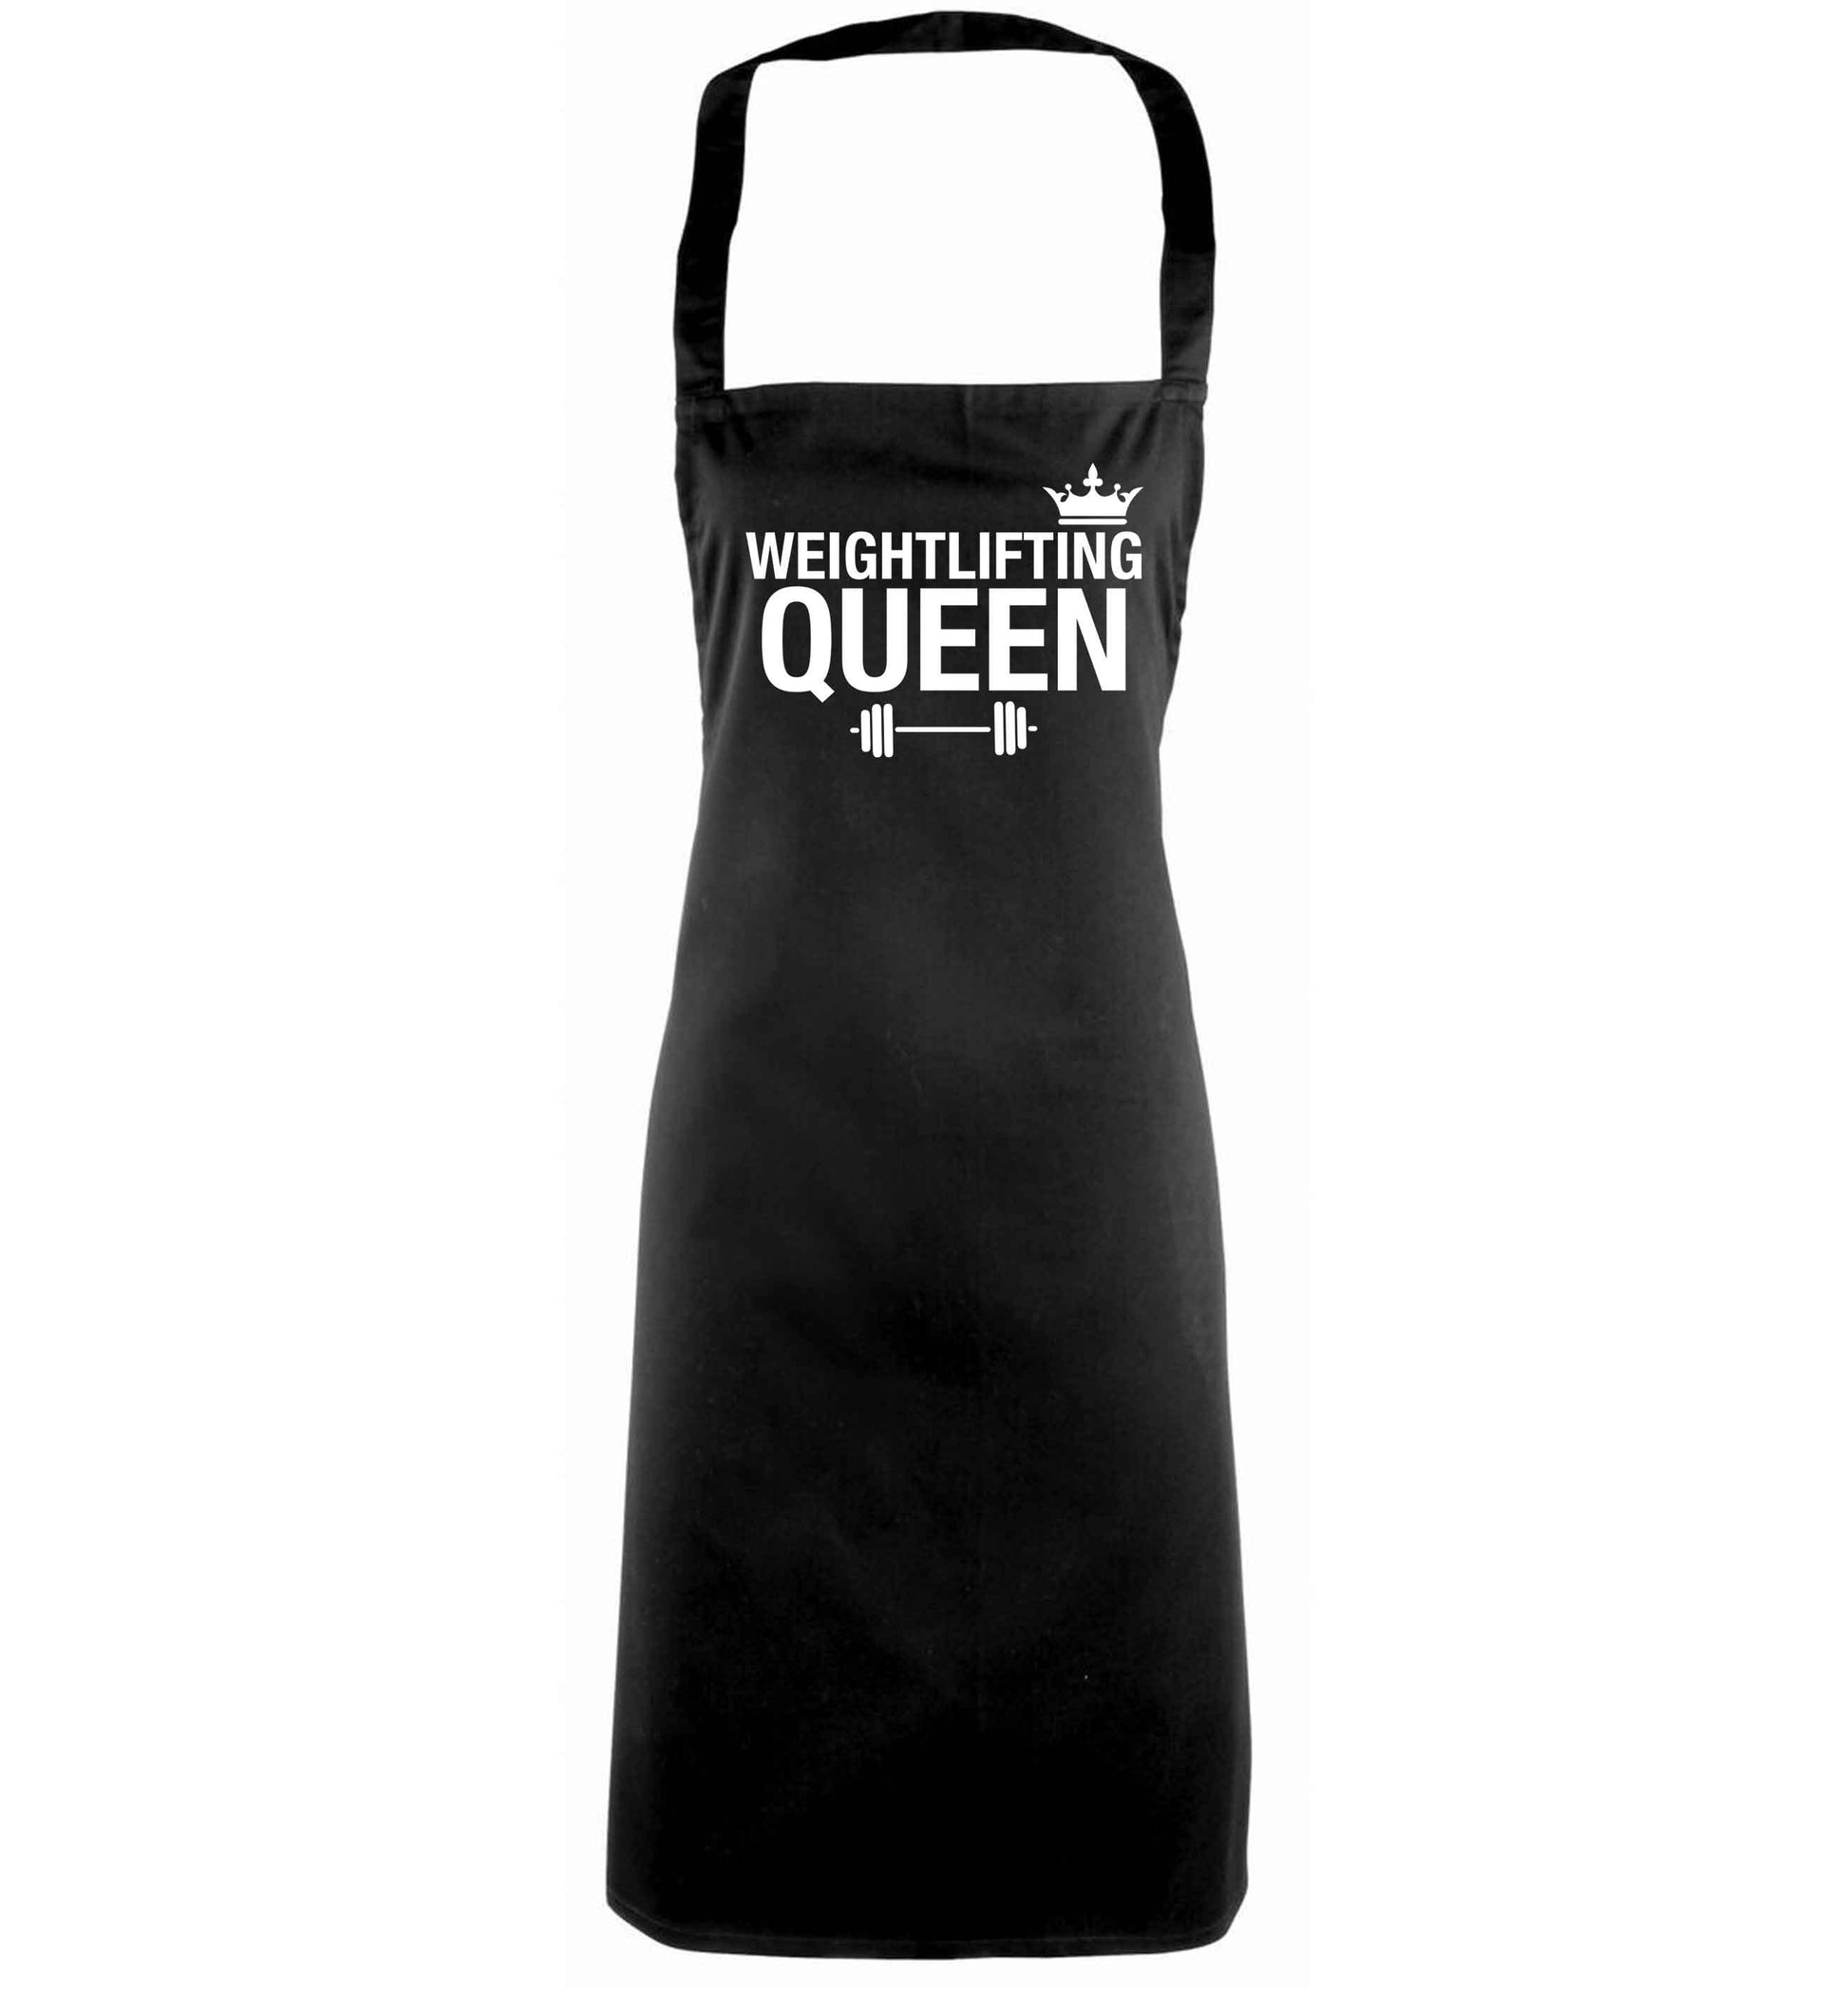 Weightlifting Queen black apron